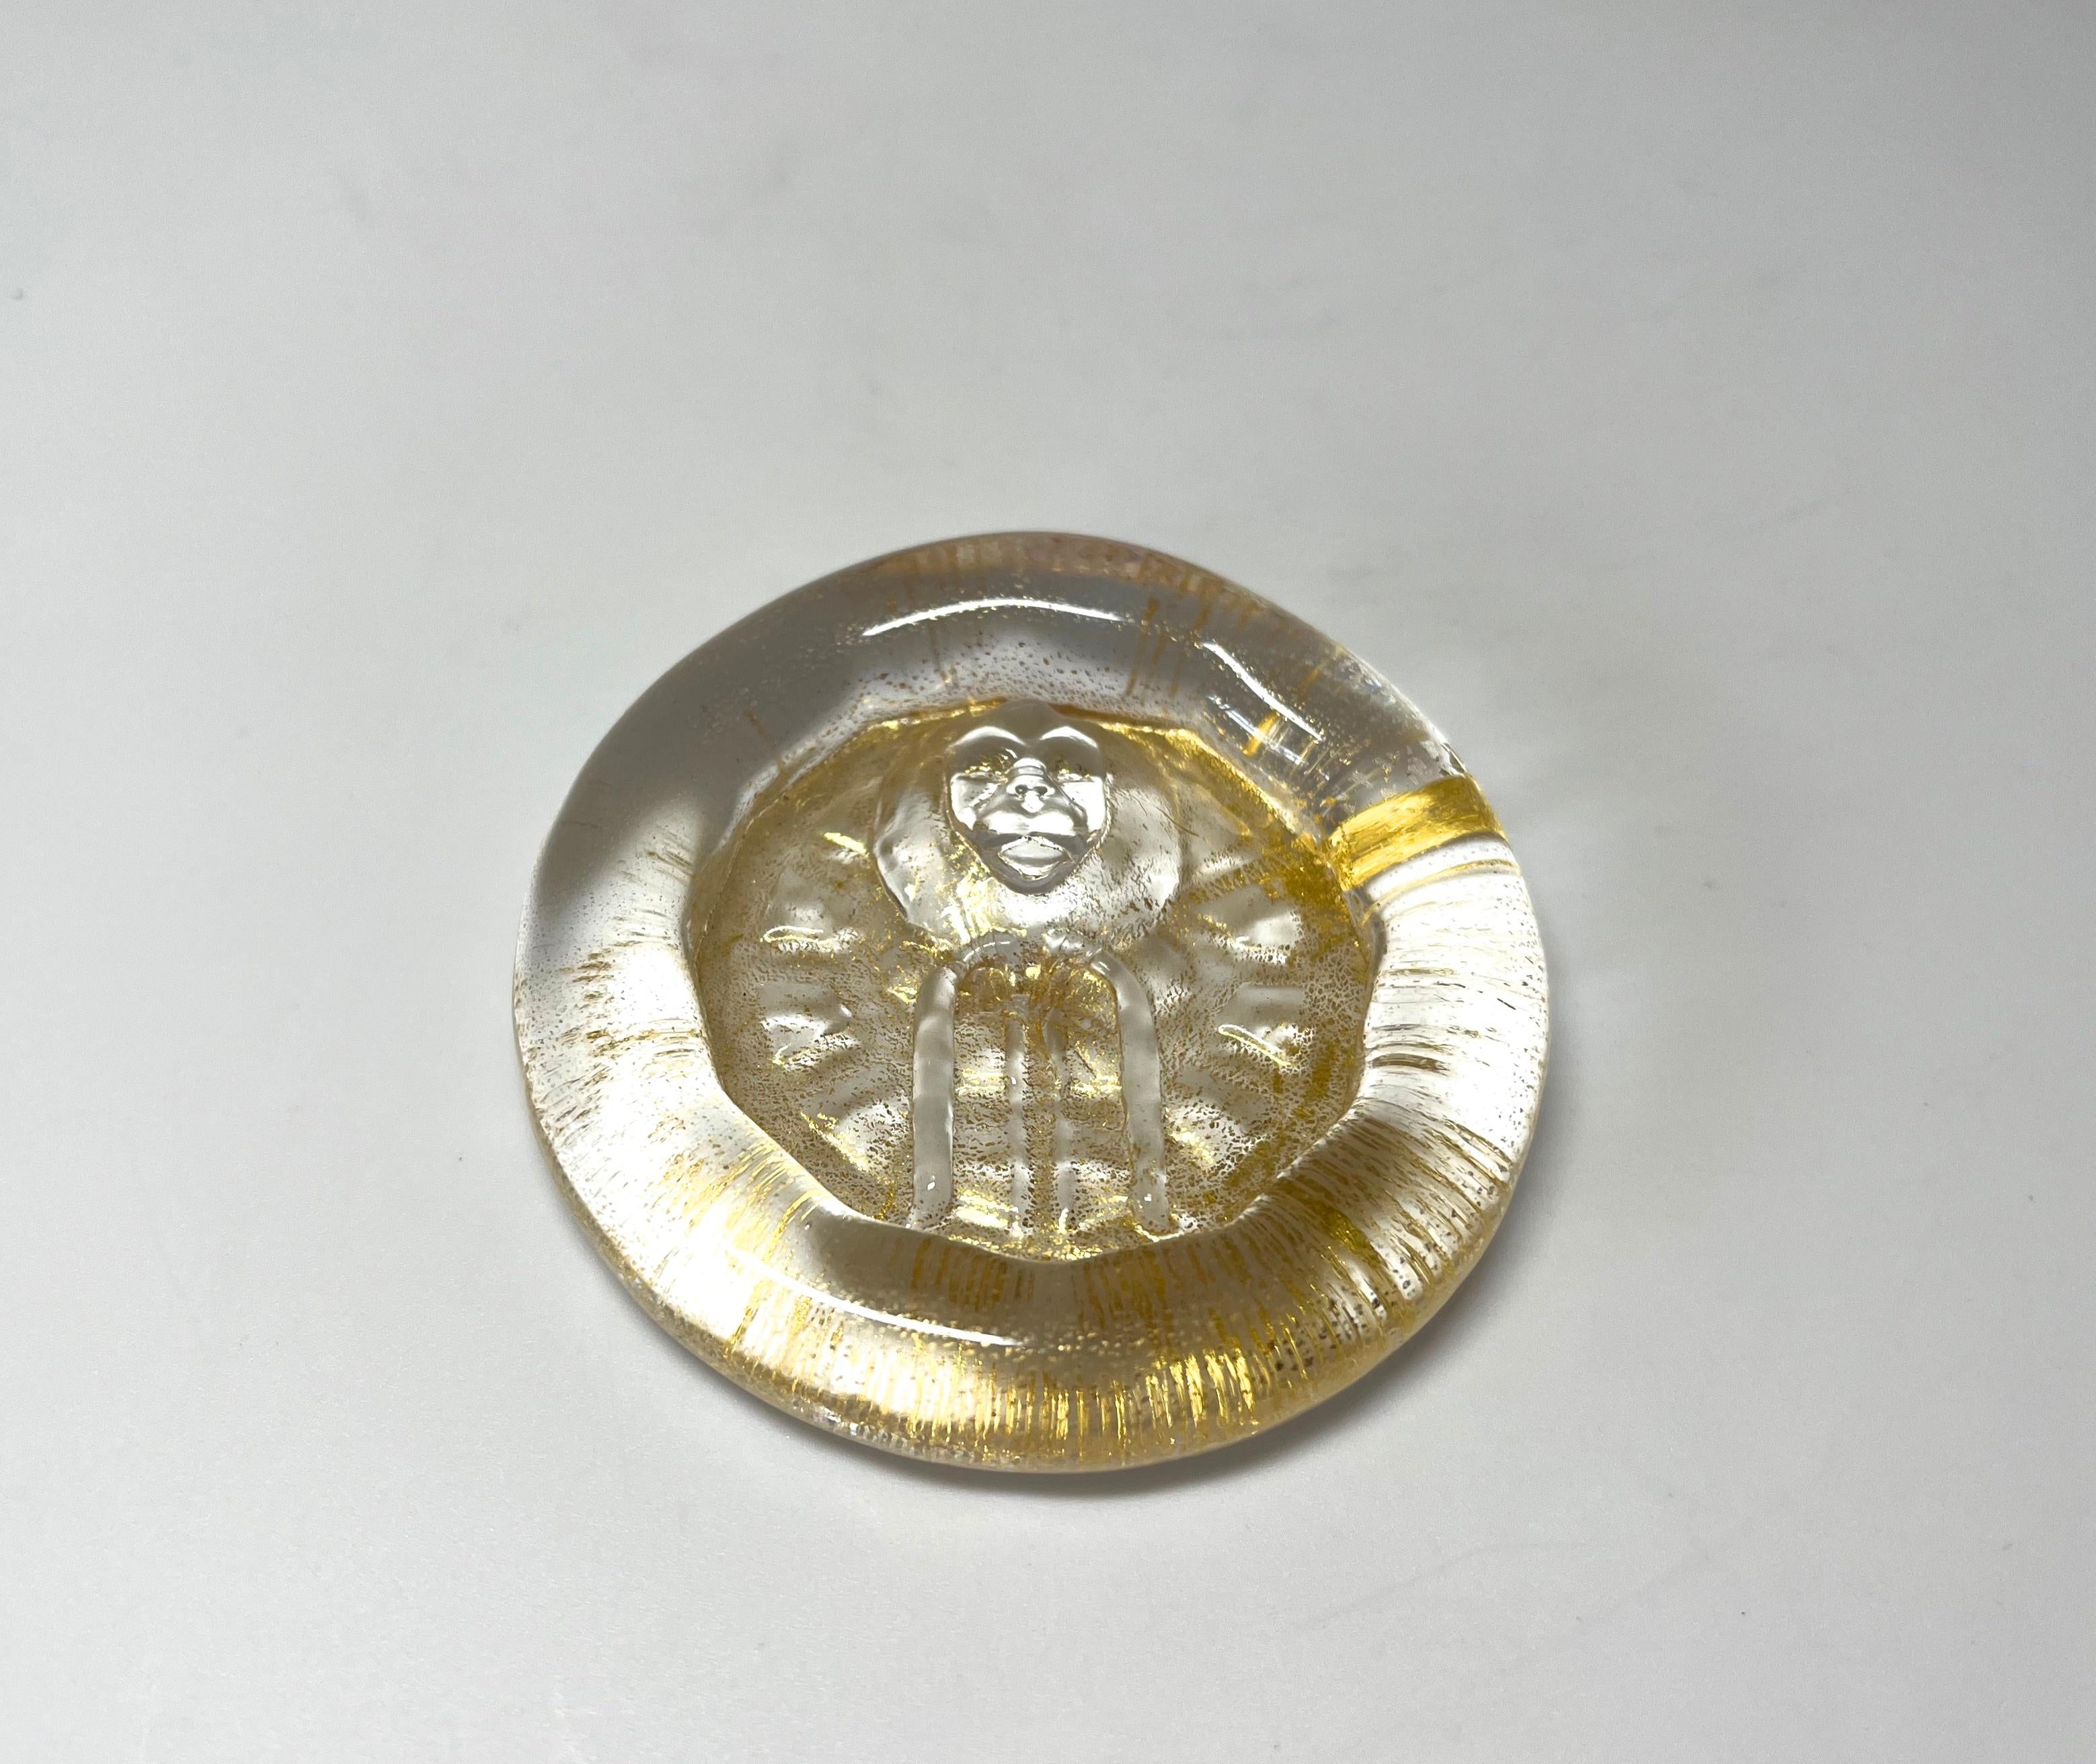 Fascinating small Murano glass paperweight medallion bearing the image The Lion of St Mark, Venice, Italy
A tactile piece with 24kt gold leaf. 
Circa 1970's
Height 0.3 inch, Diameter 2.25 inch
Very good condition 
Wear consistent with age and use